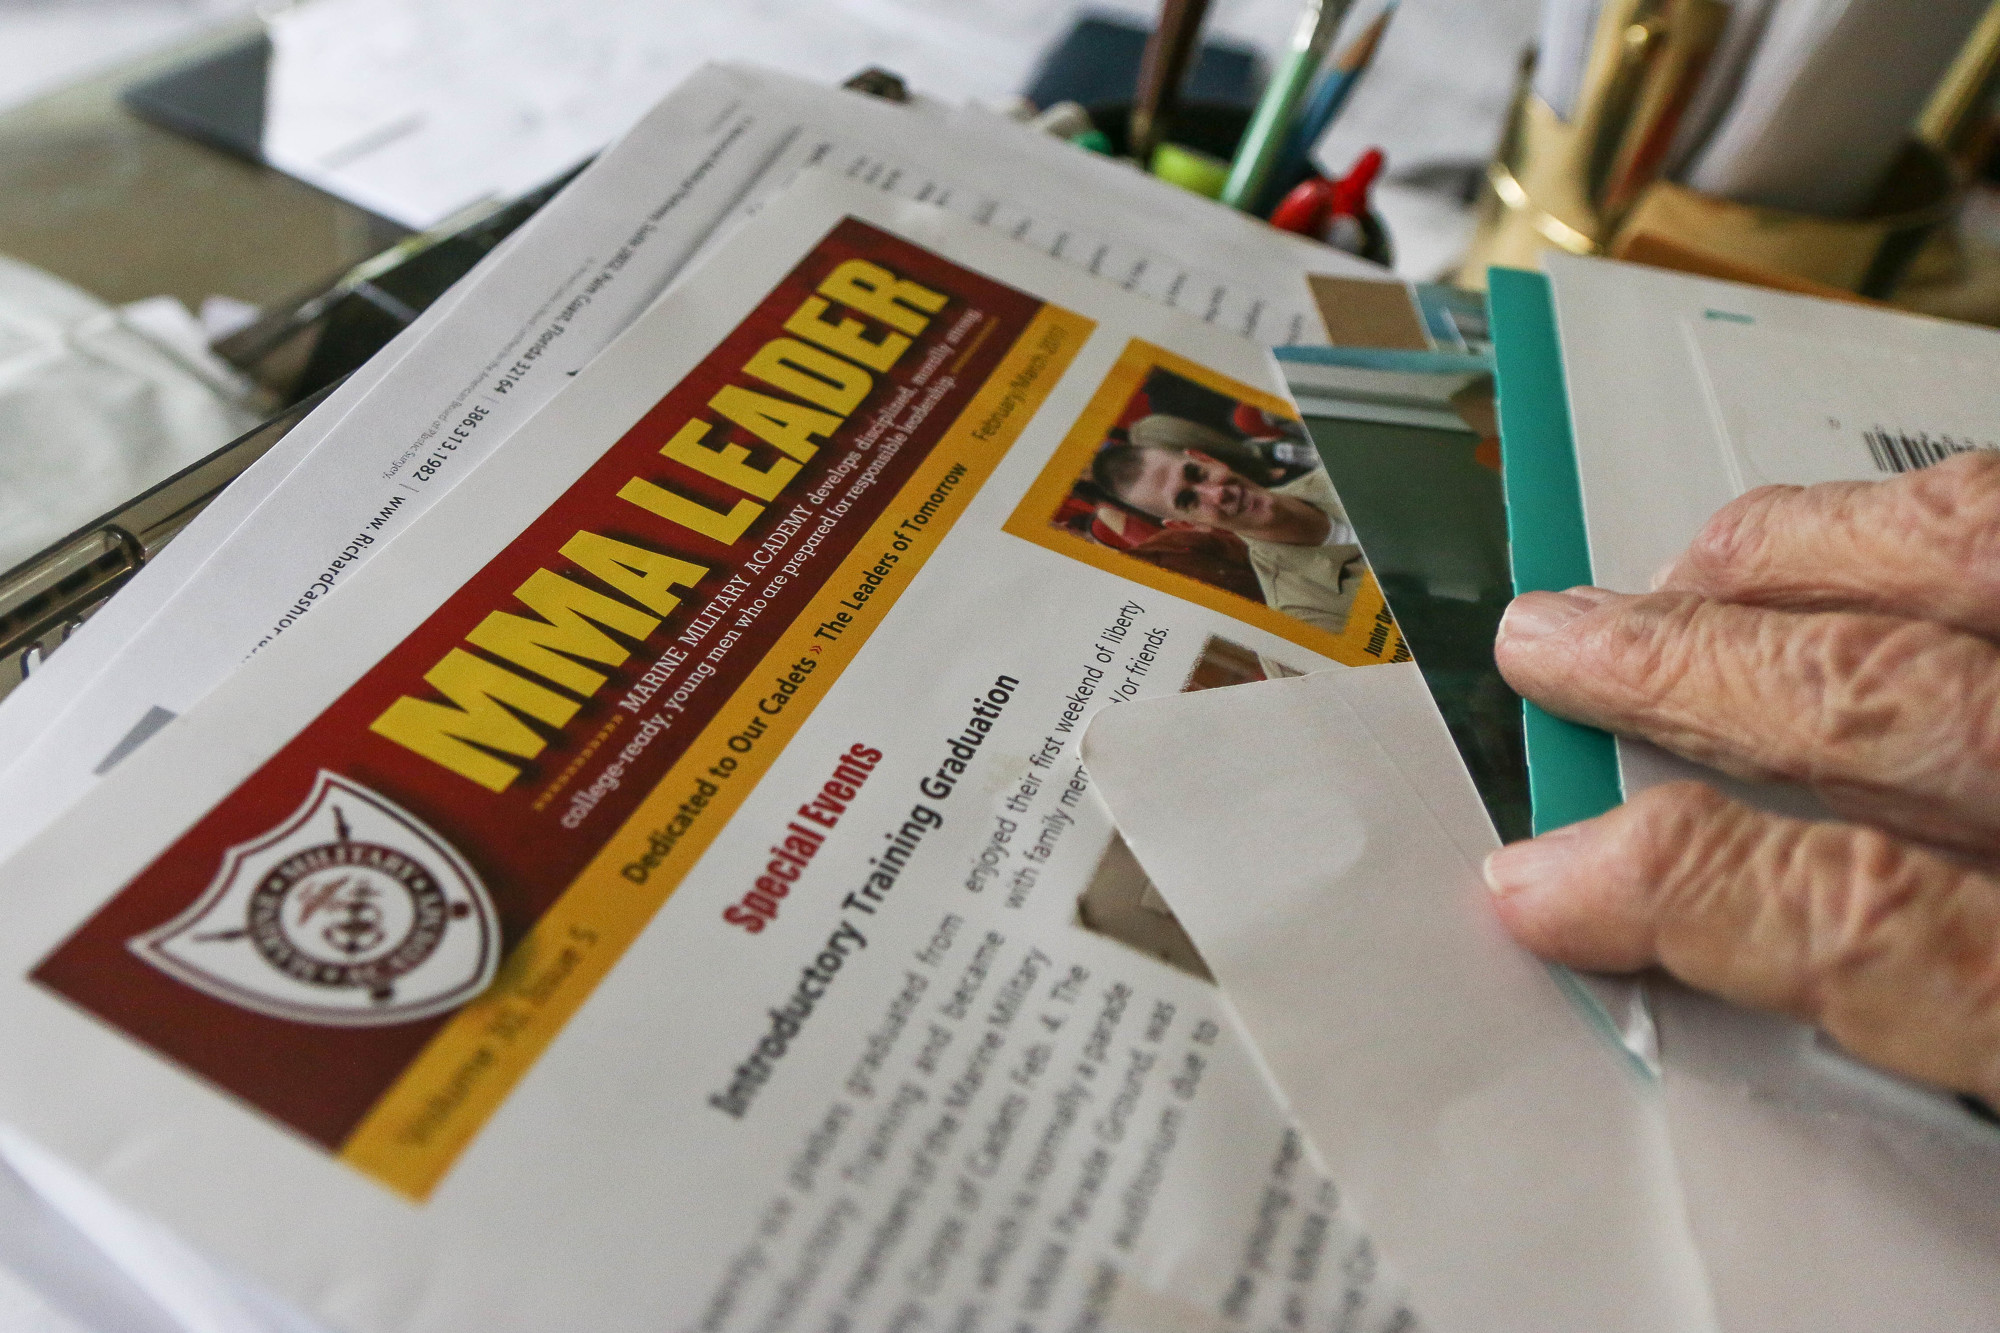 Bob Bey looks through a Marine Military Academy newsletter, in which he is featured. Photo by Paige Wilson